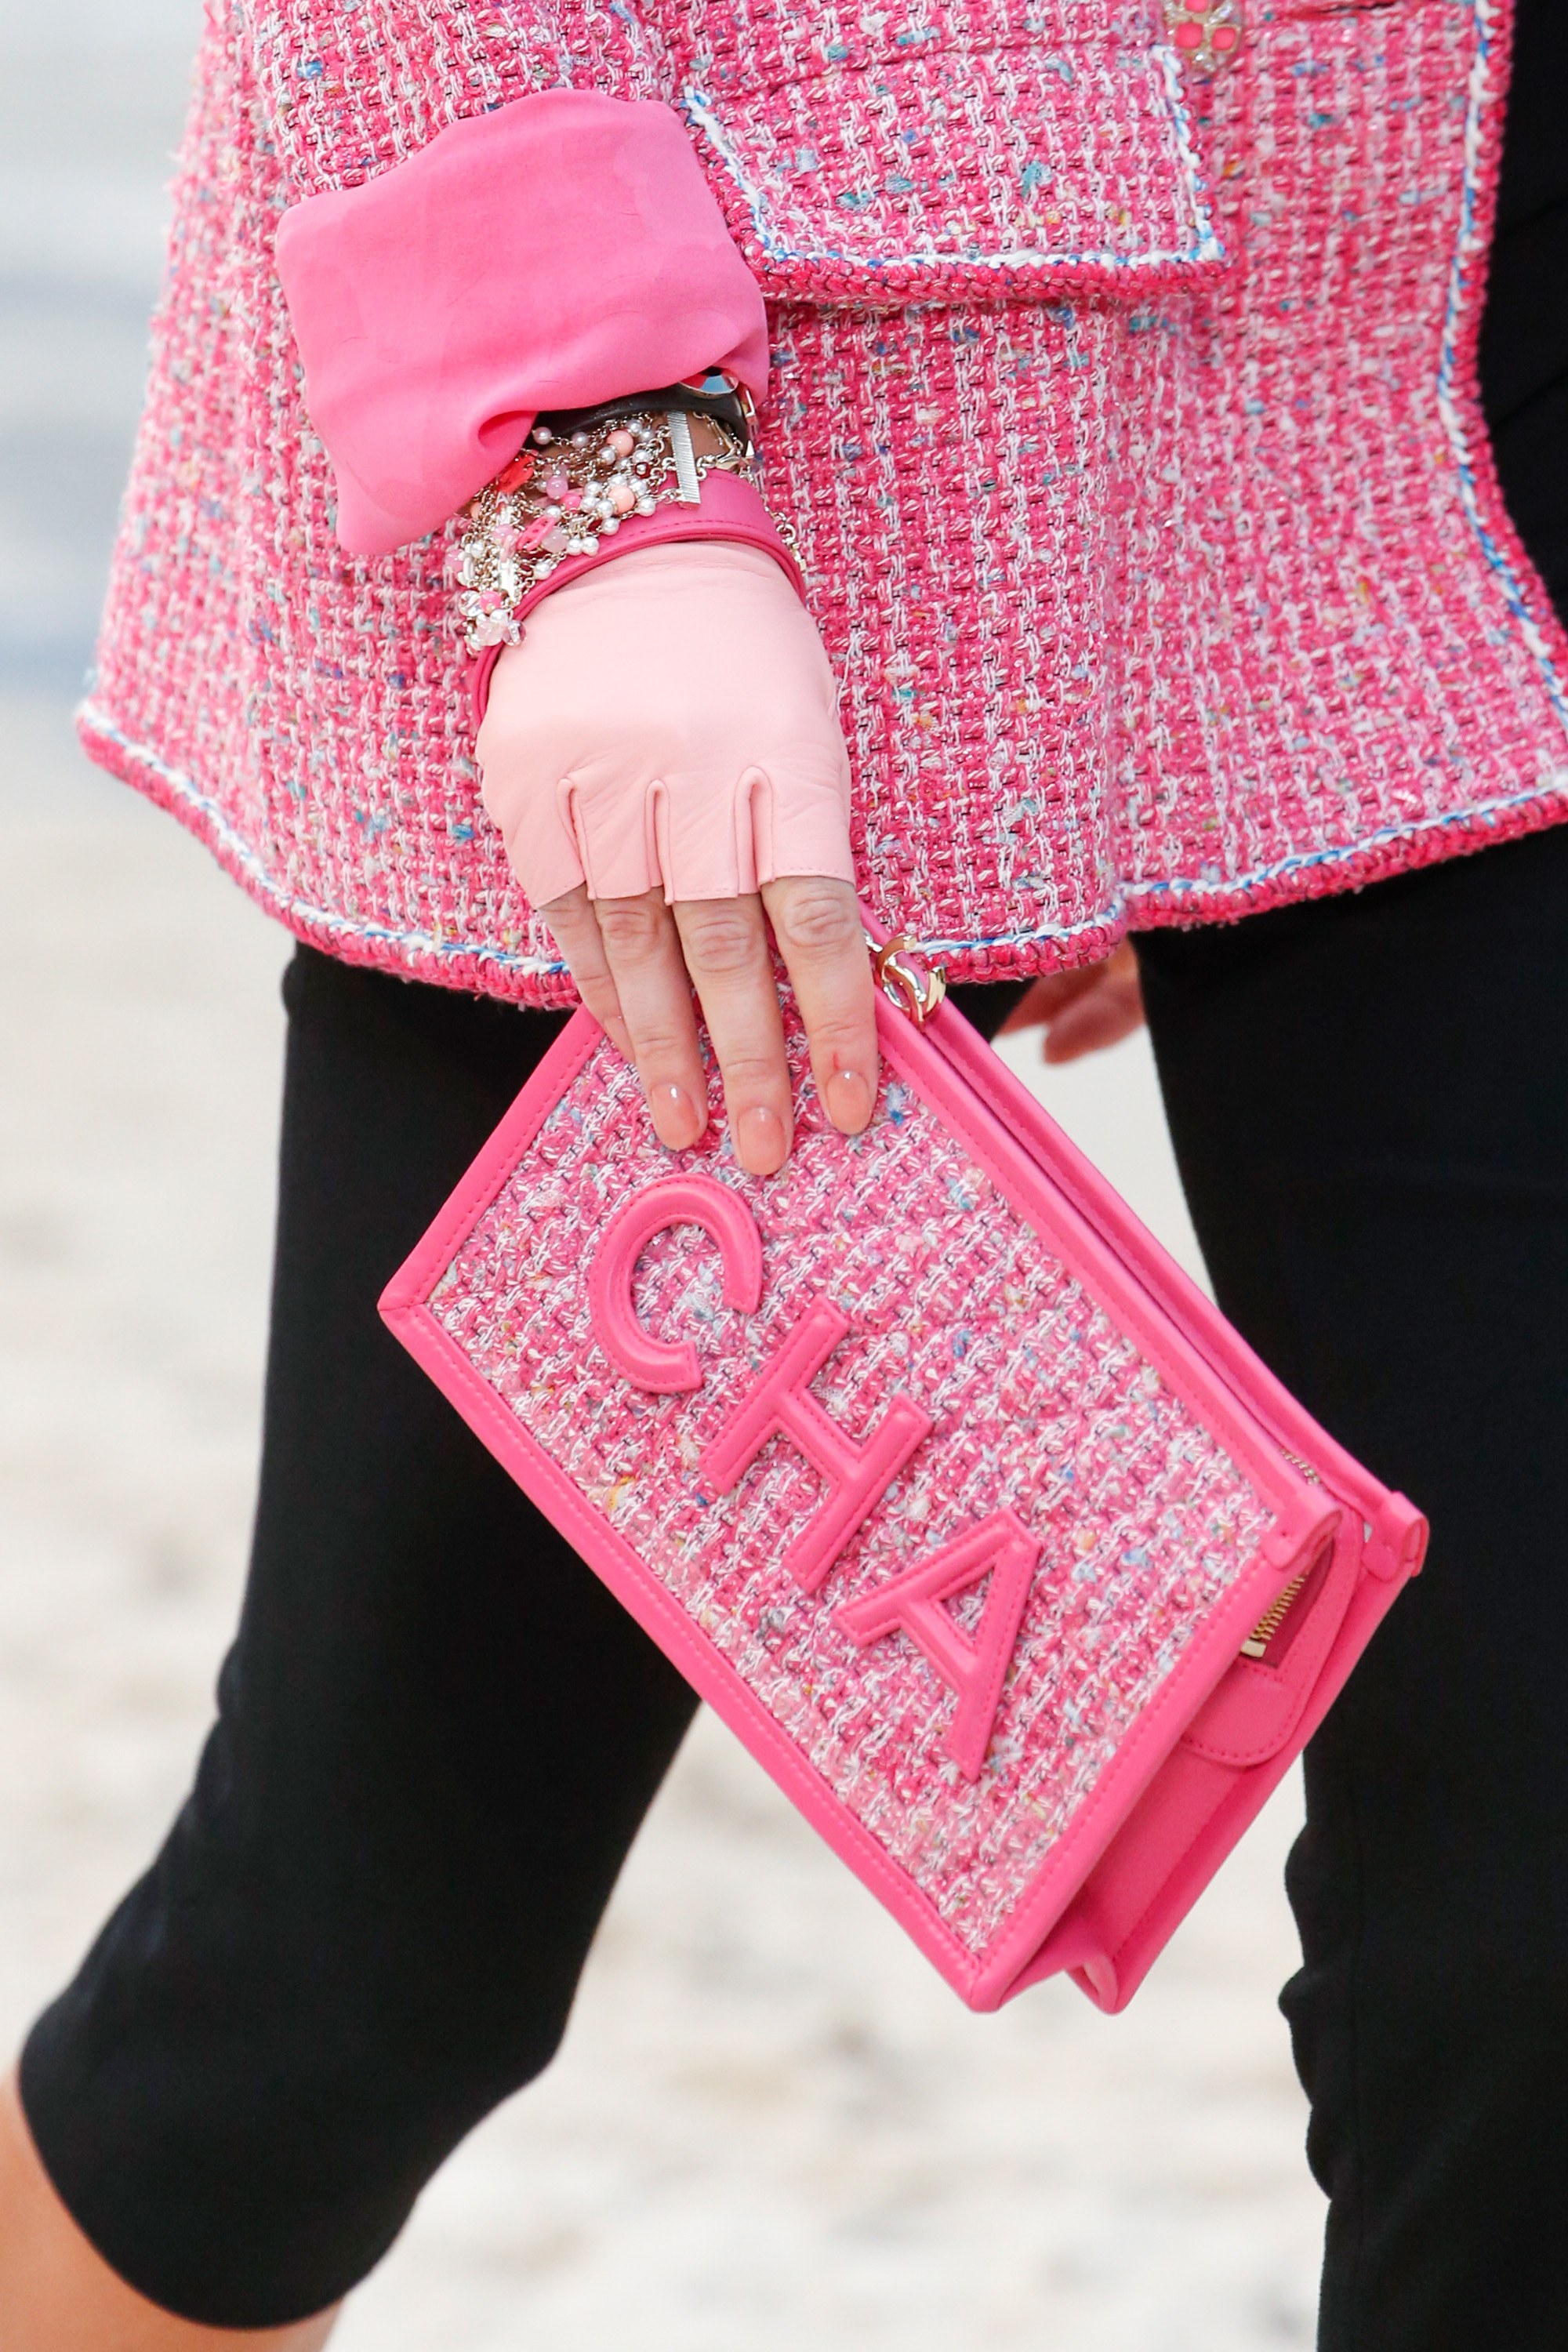 Chanel Spring/Summer 2019 Runway Bag Collection - Chanel By The Sea | Spotted Fashion